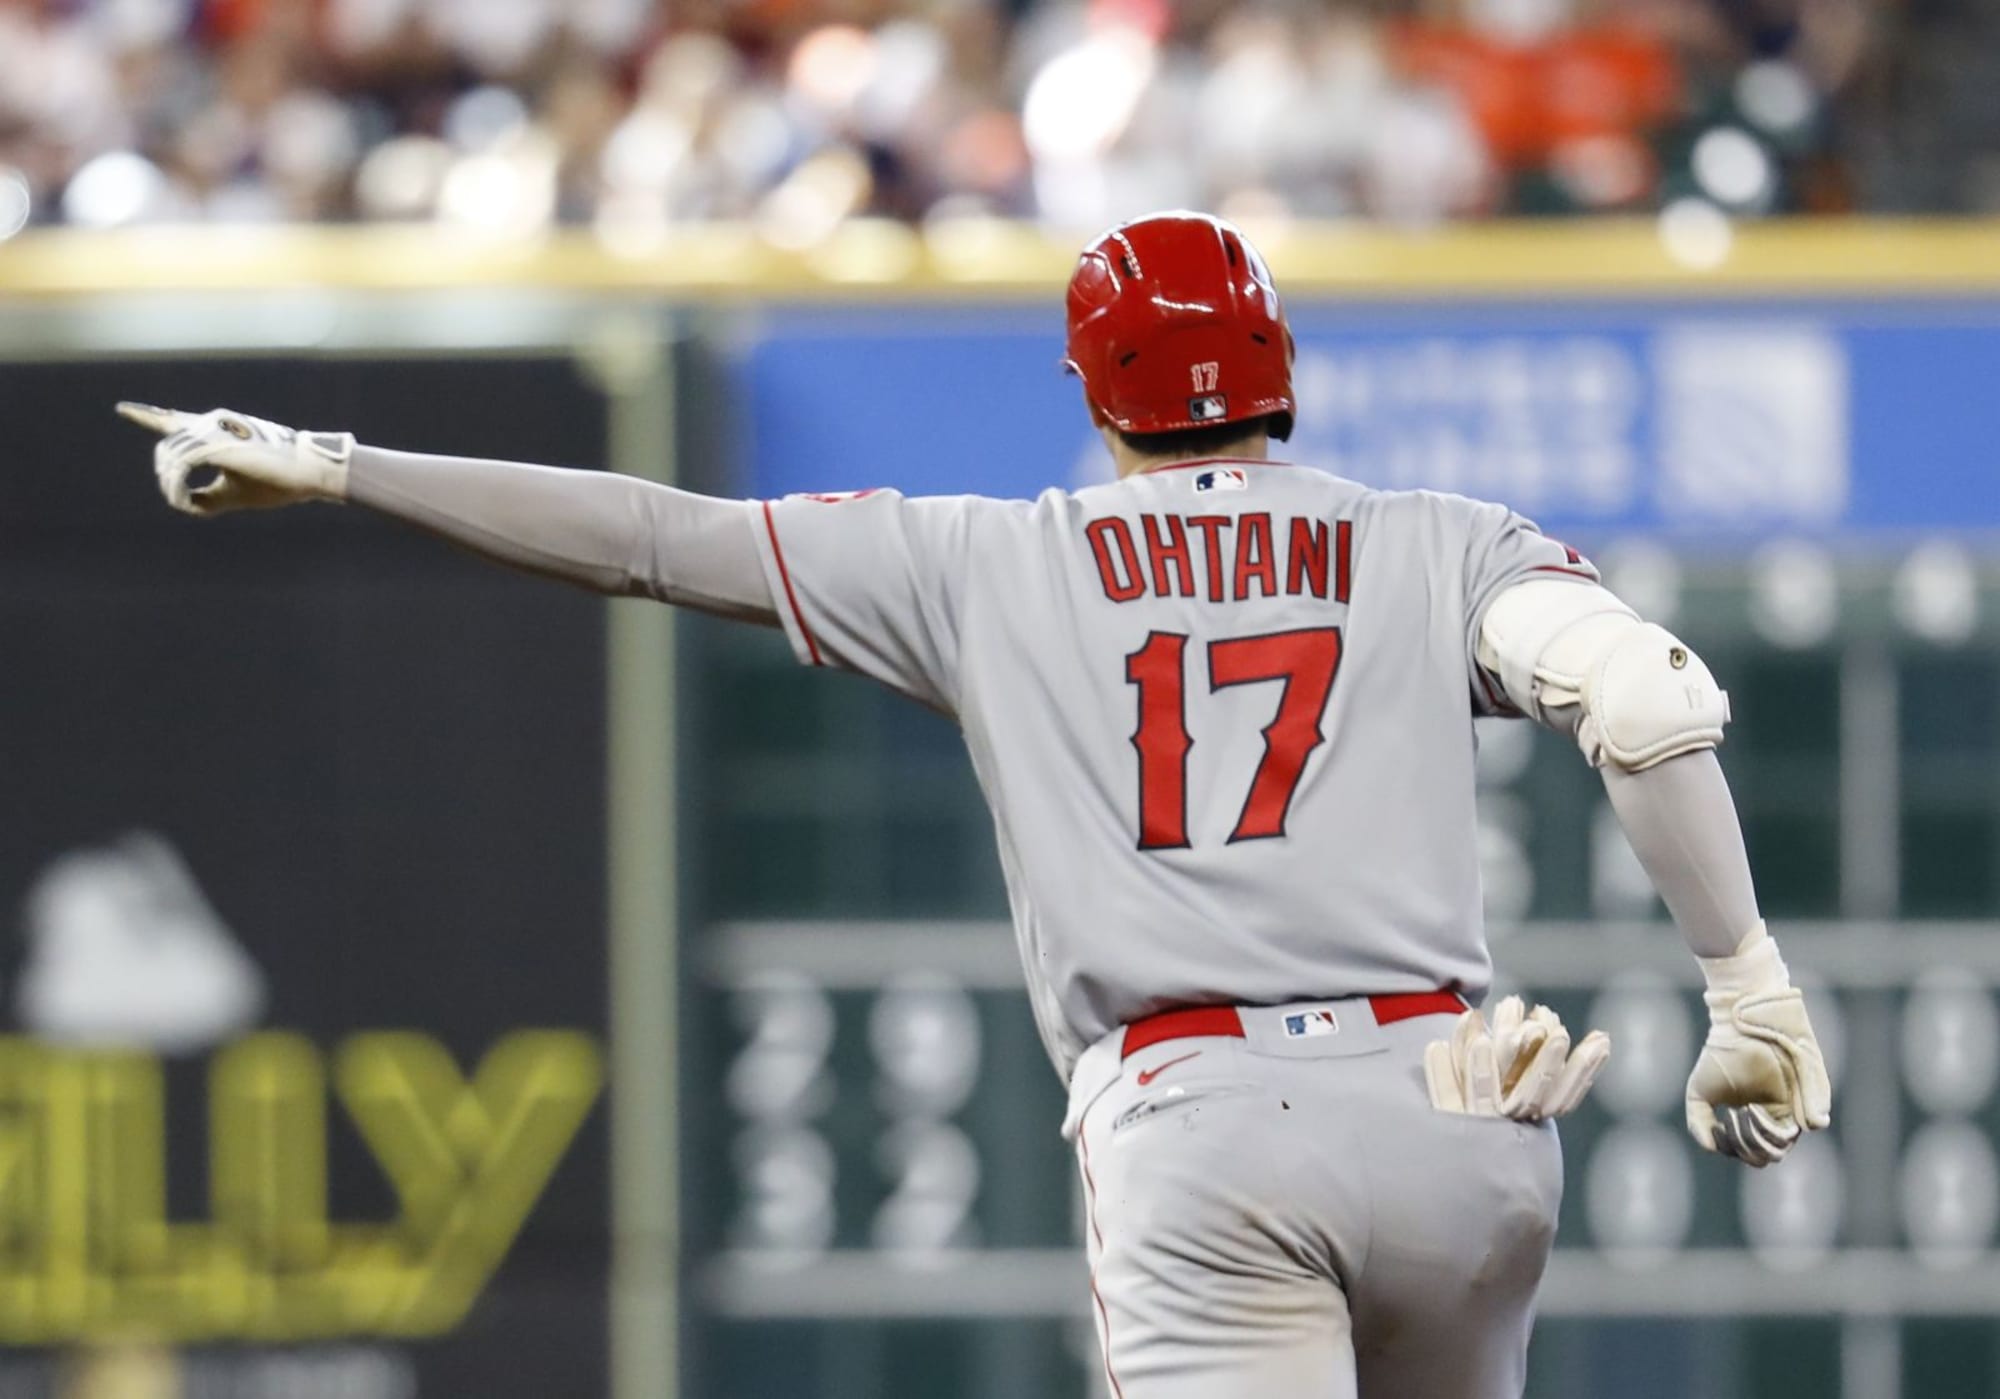 Los Angeles Angels: Shohei Ohtani matches Babe Ruth